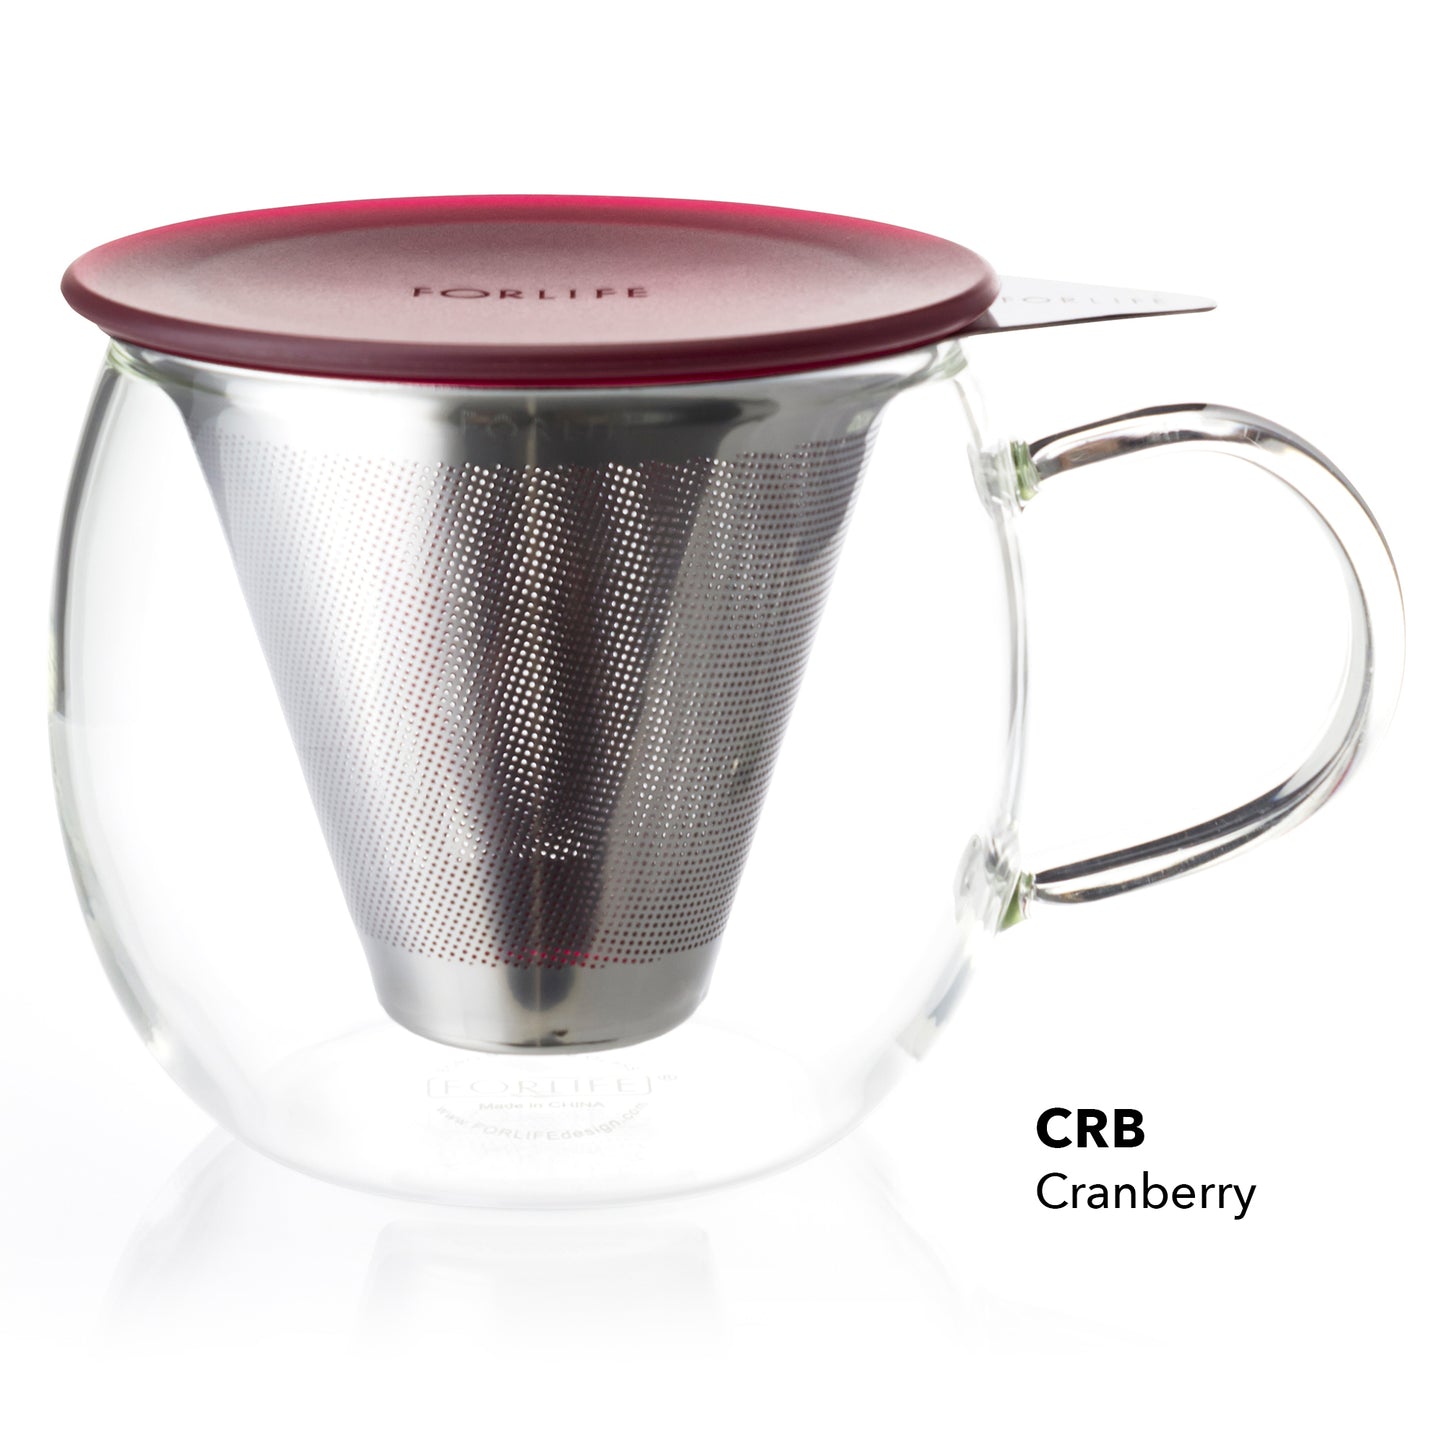 Lucidity Glass Brew-in-Cup with Stainless Infuser & Lid  12 oz